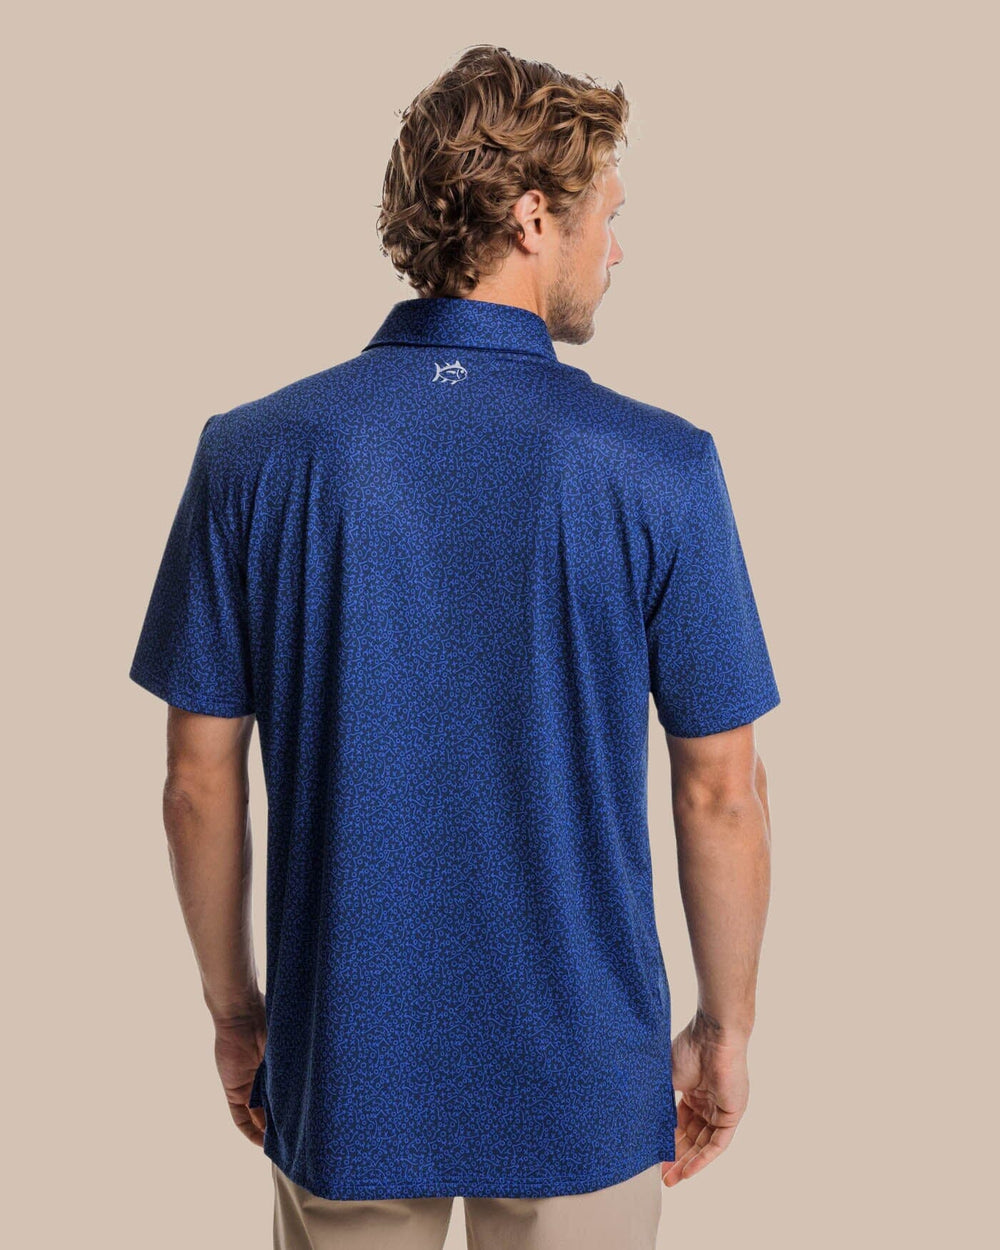 The back view of the Southern Tide Driver Gameplay Polo by Southern Tide - Navy